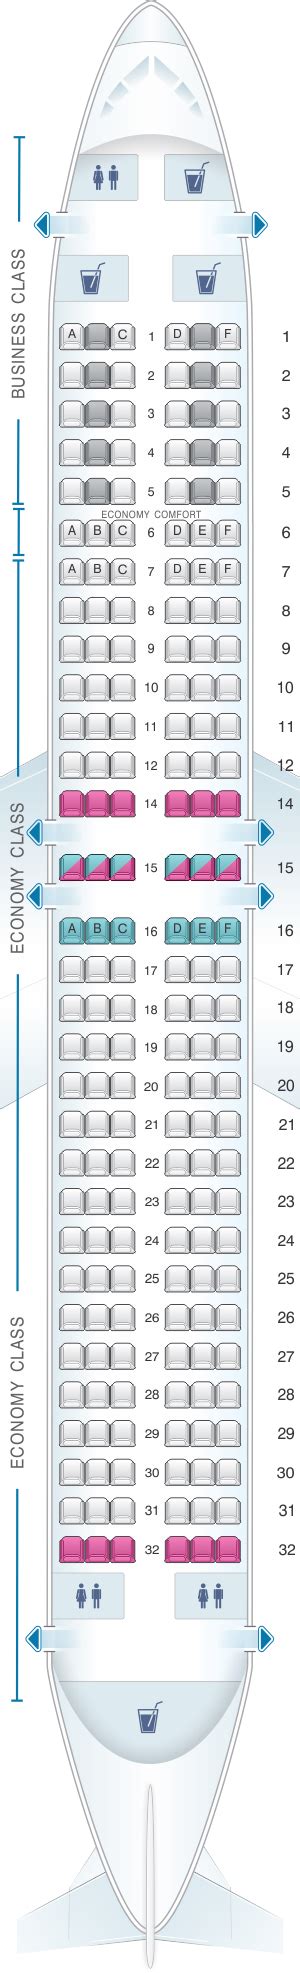 boeing 737-800 seating chart klm